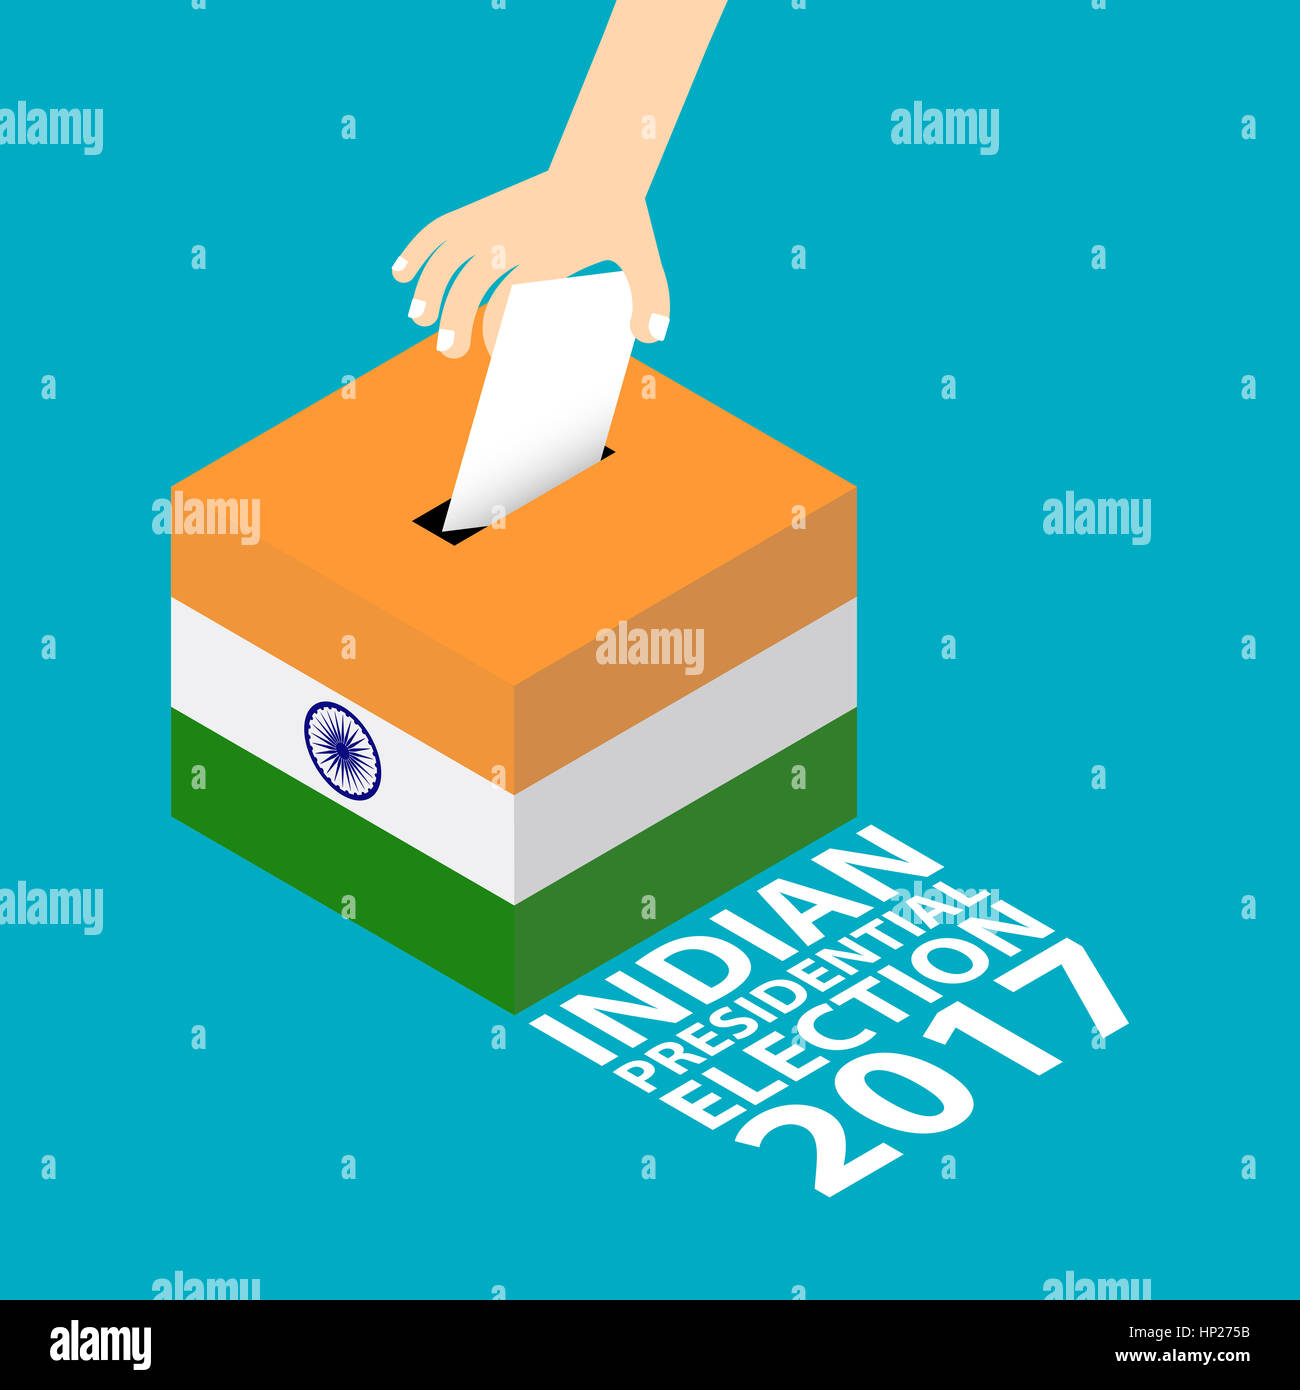 India Presidential Election 2017 Illustration Flat Style - Hand Putting Voting Paper in the Ballot Box Stock Photo